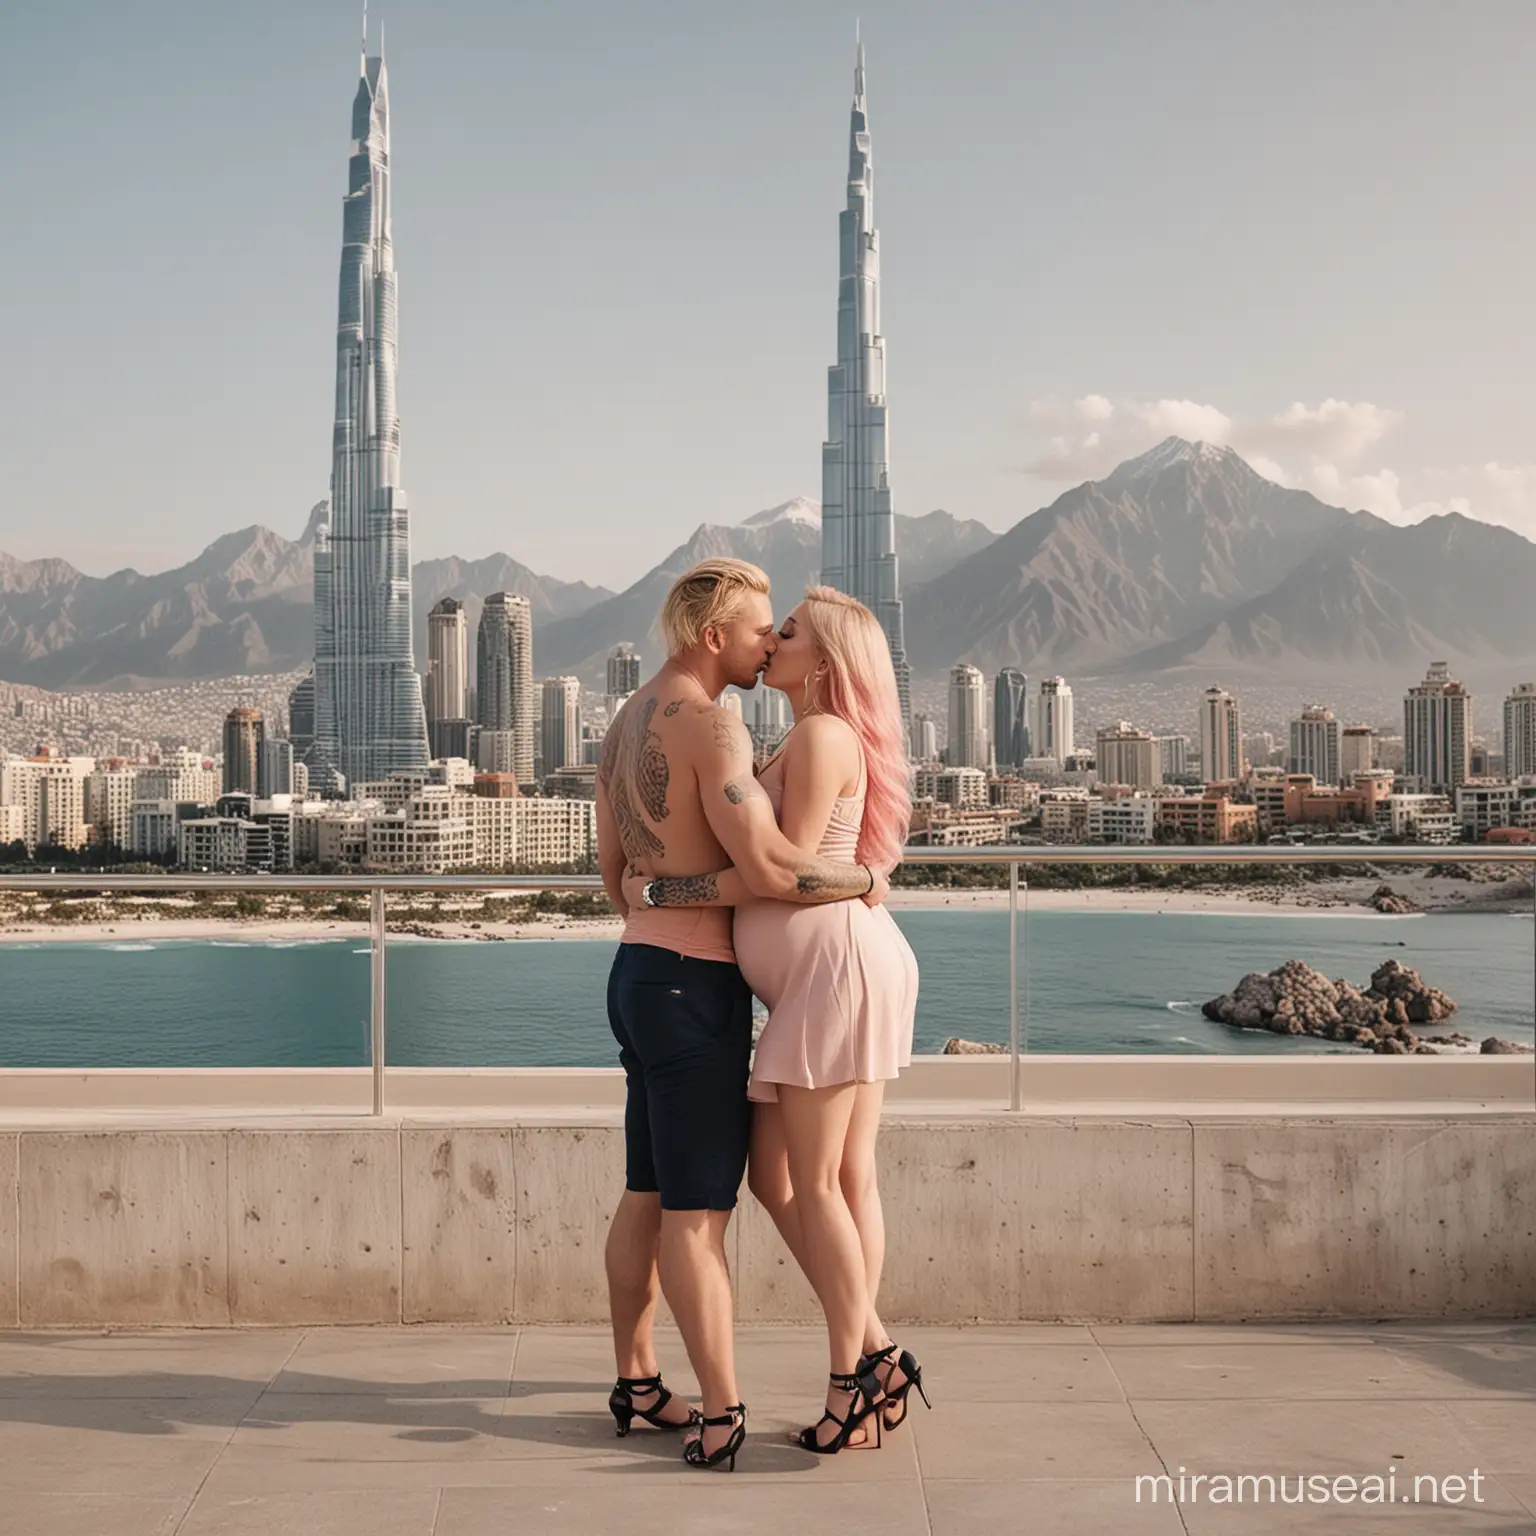 Romantic Kiss of a BlondePink Haired Pregnant Woman Muscular Husband near Mountain Ocean Skyscraper